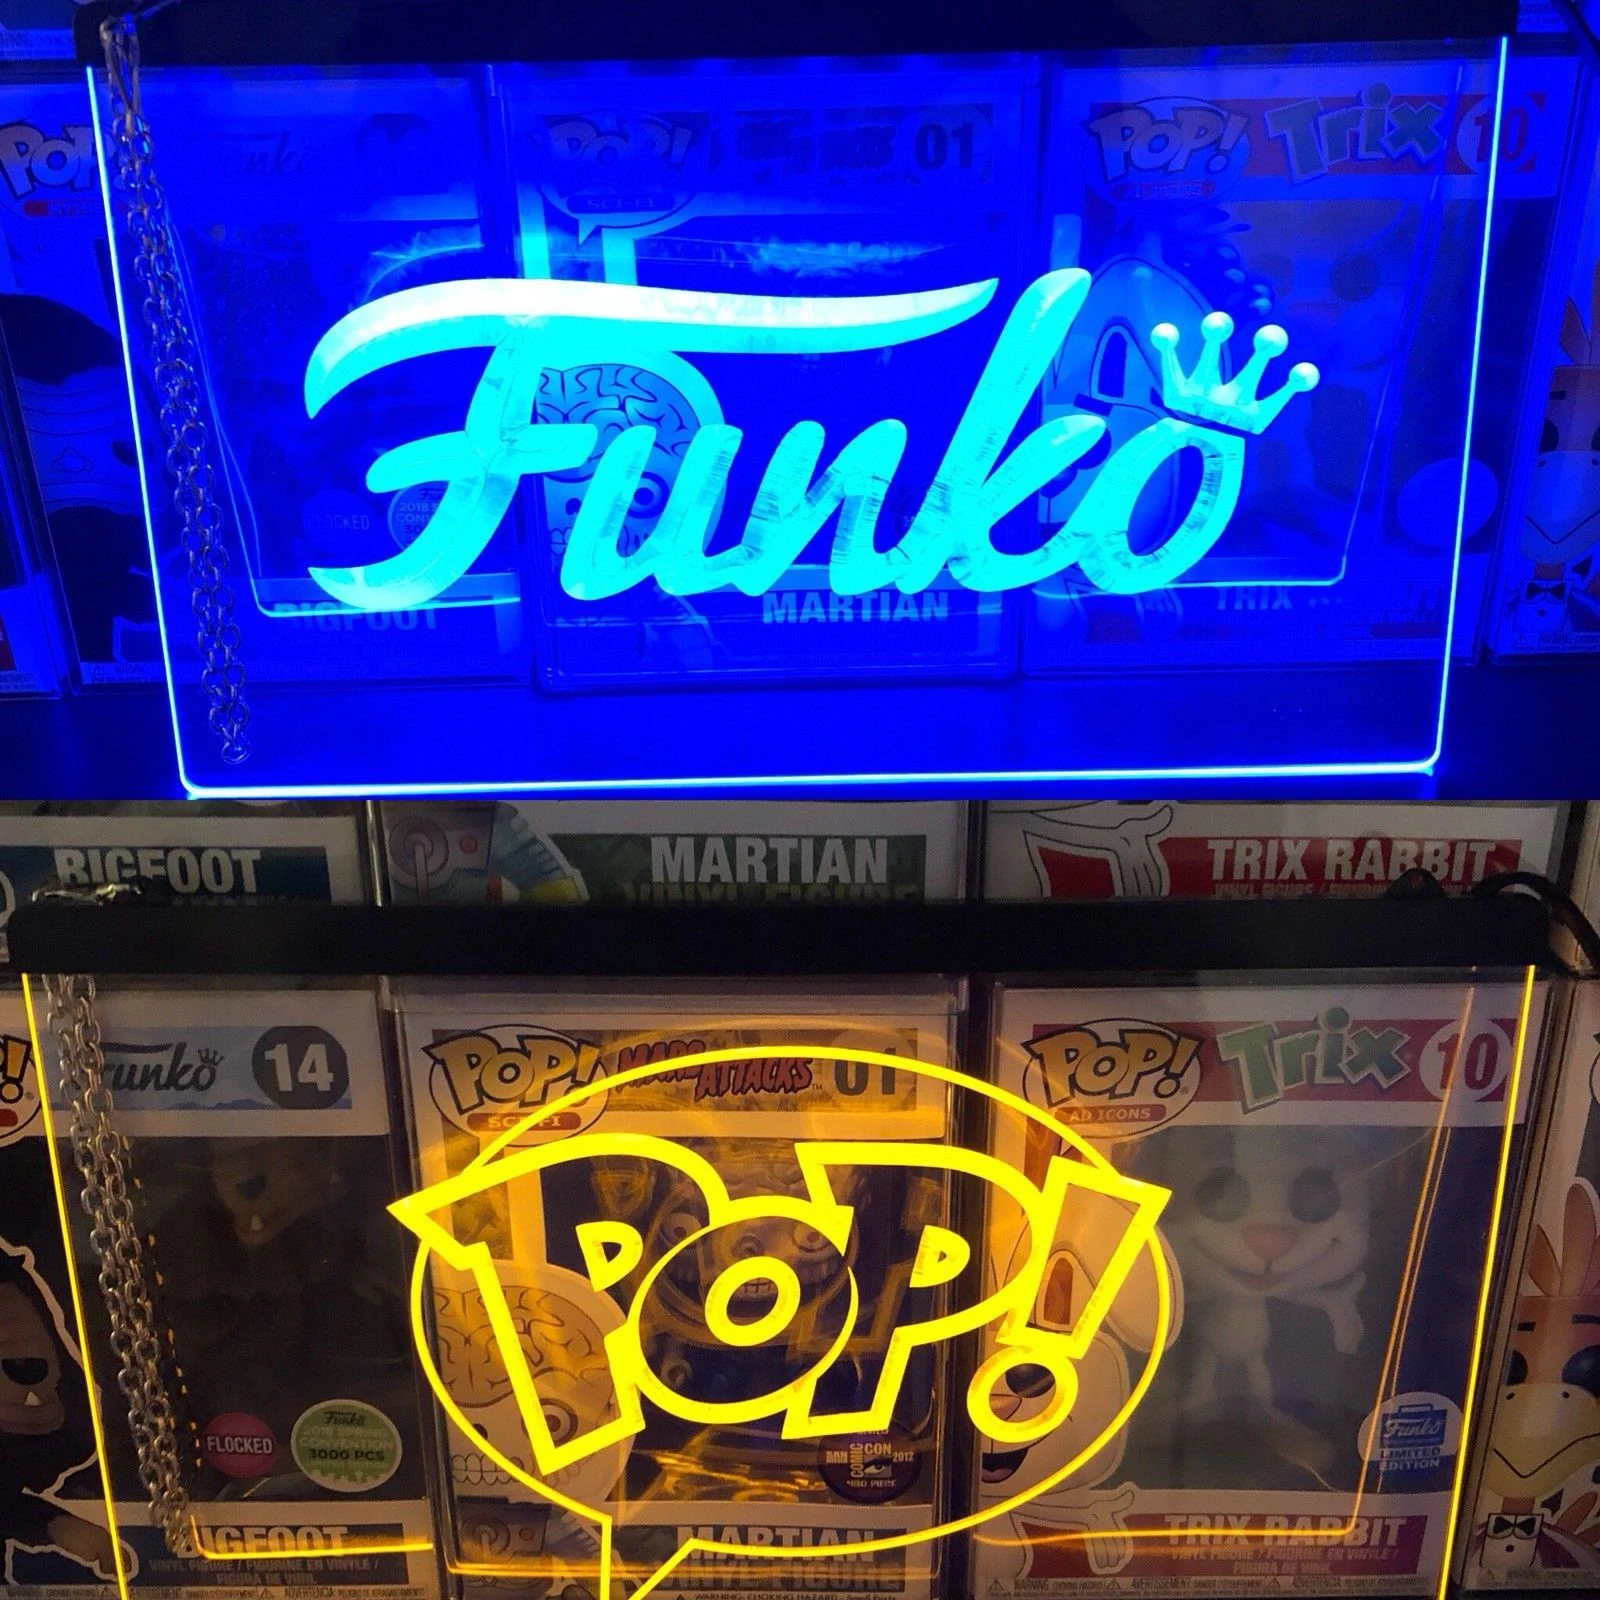 1 Funko POP LED NEON Acrylic Sign Display Vaulted Limited Edition Action Figure 